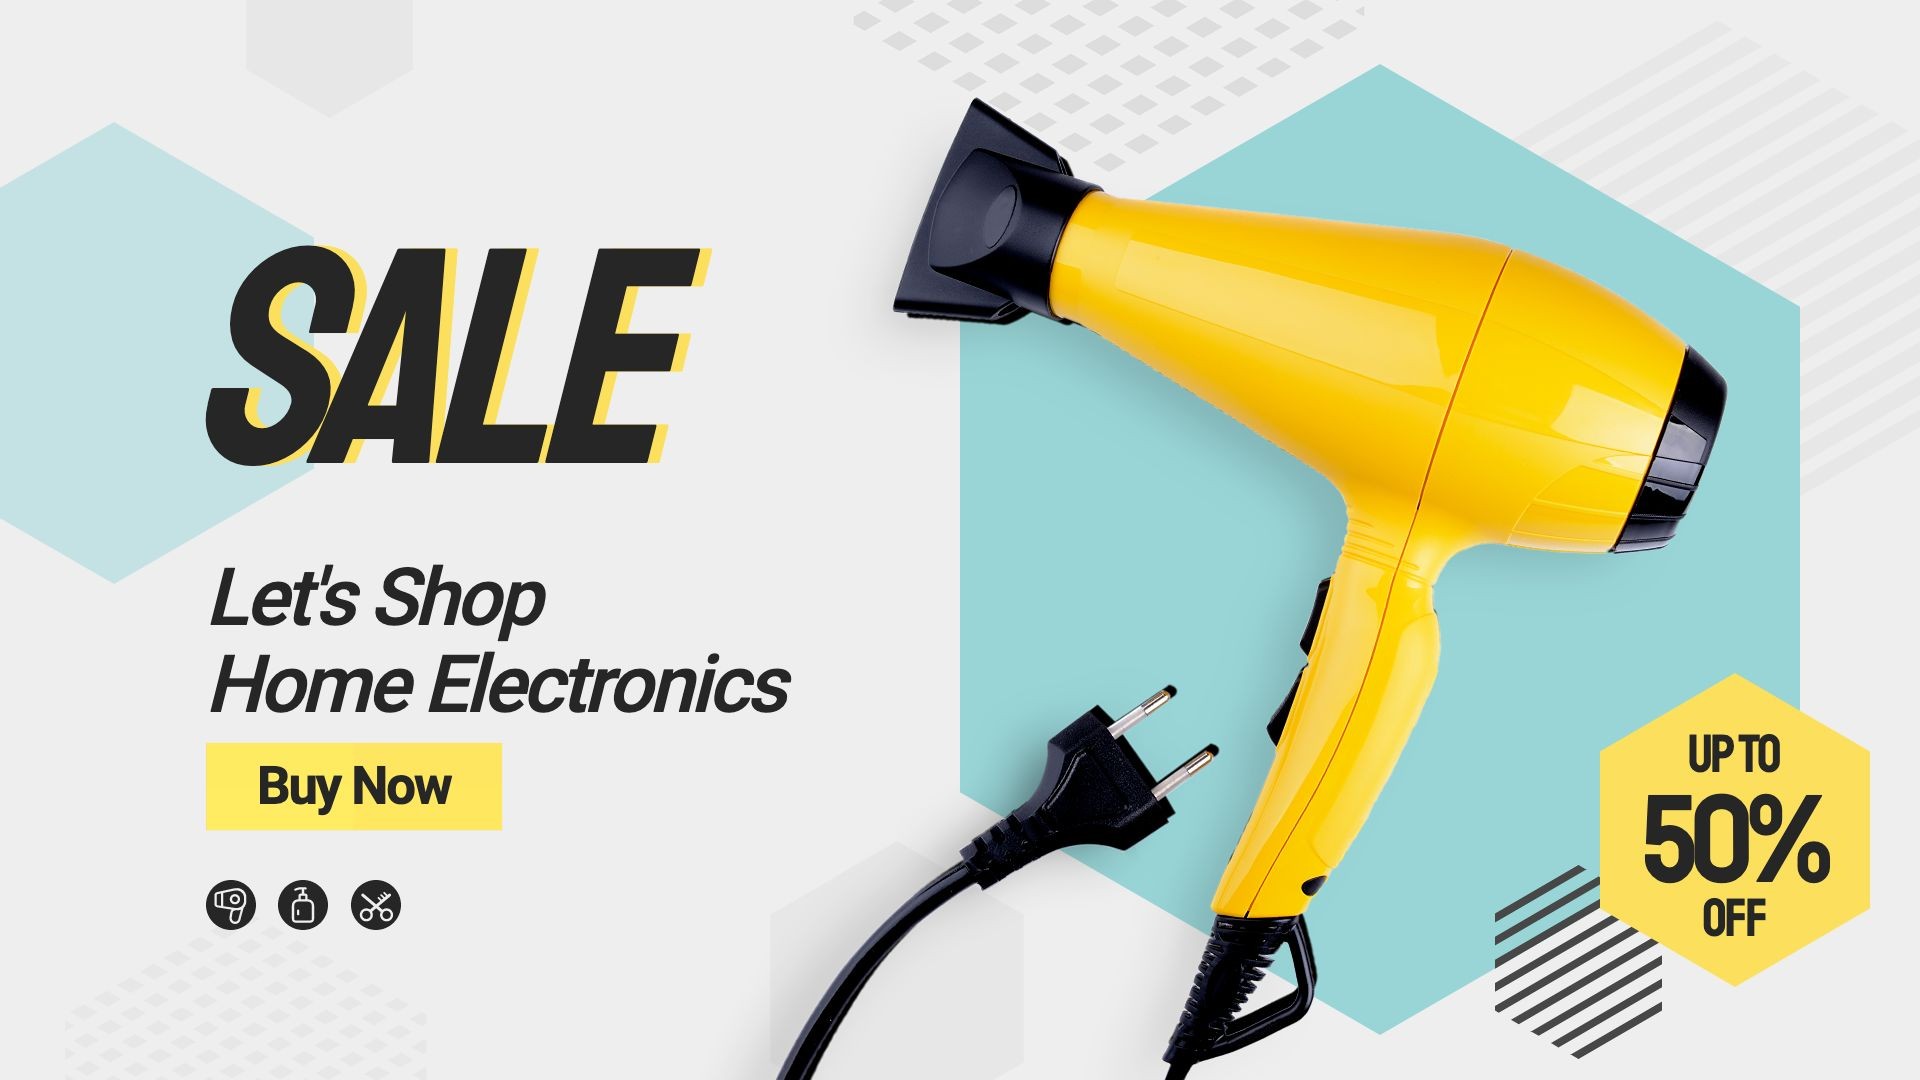 Hexagon Element Hair Dryer Home Electronic Appliance Discount Sale Promo Ecommerce Banner